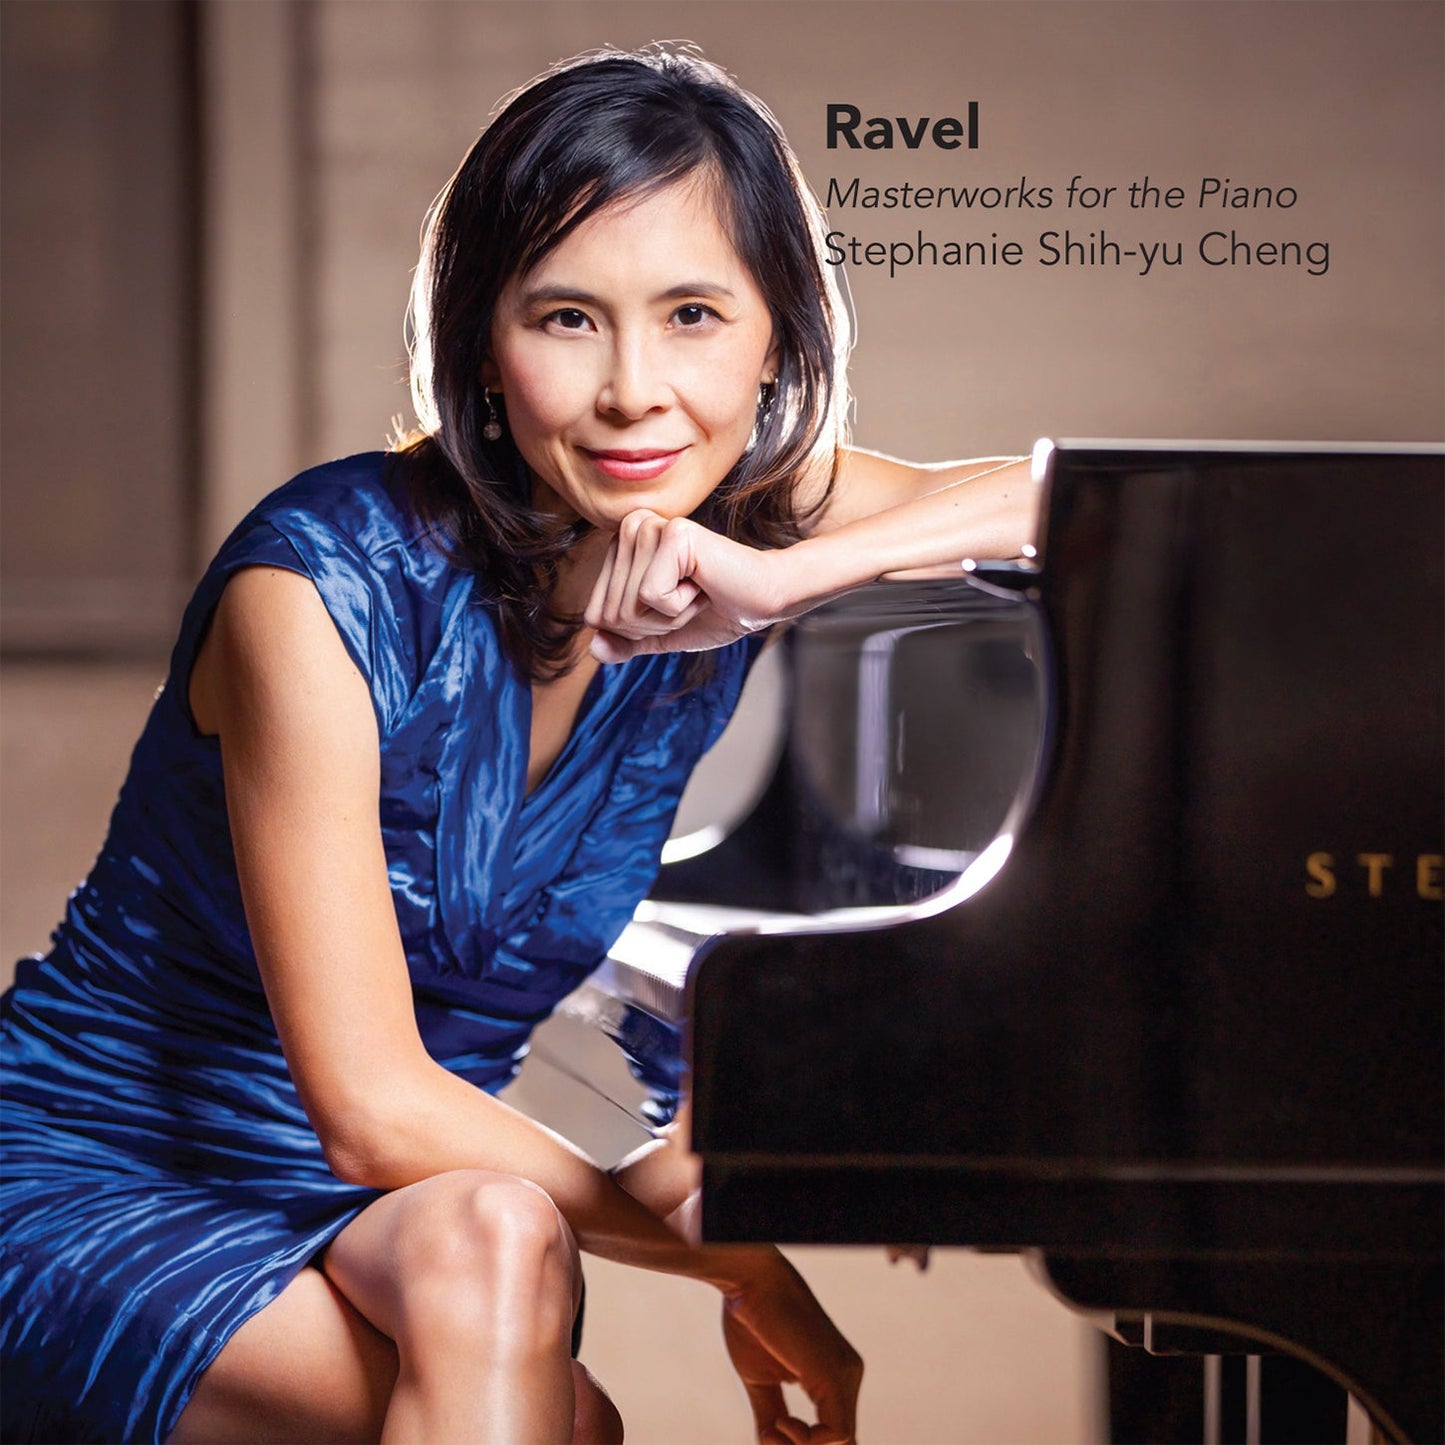 Ravel: Masterworks For The Piano